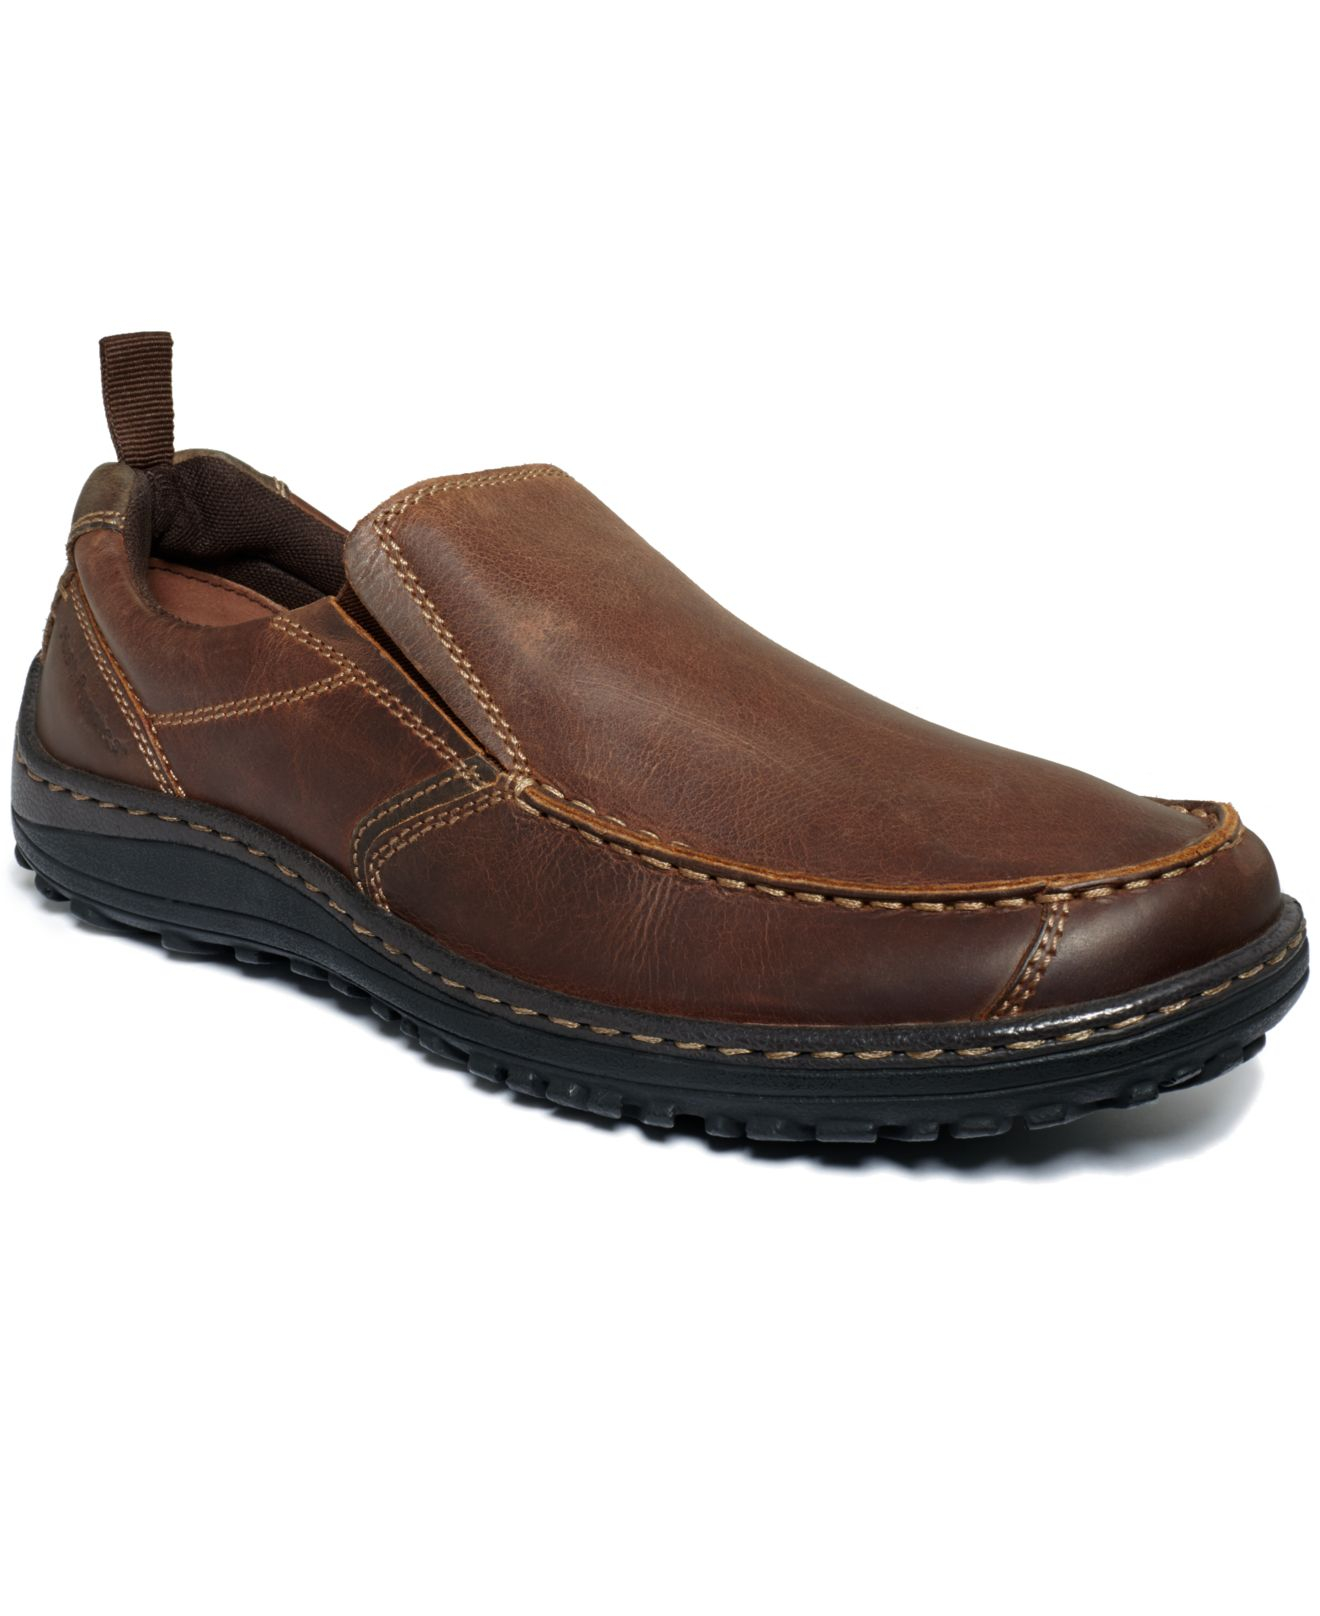 Lyst - Hush Puppies Belfast Moctoe Loafers in Brown for Men